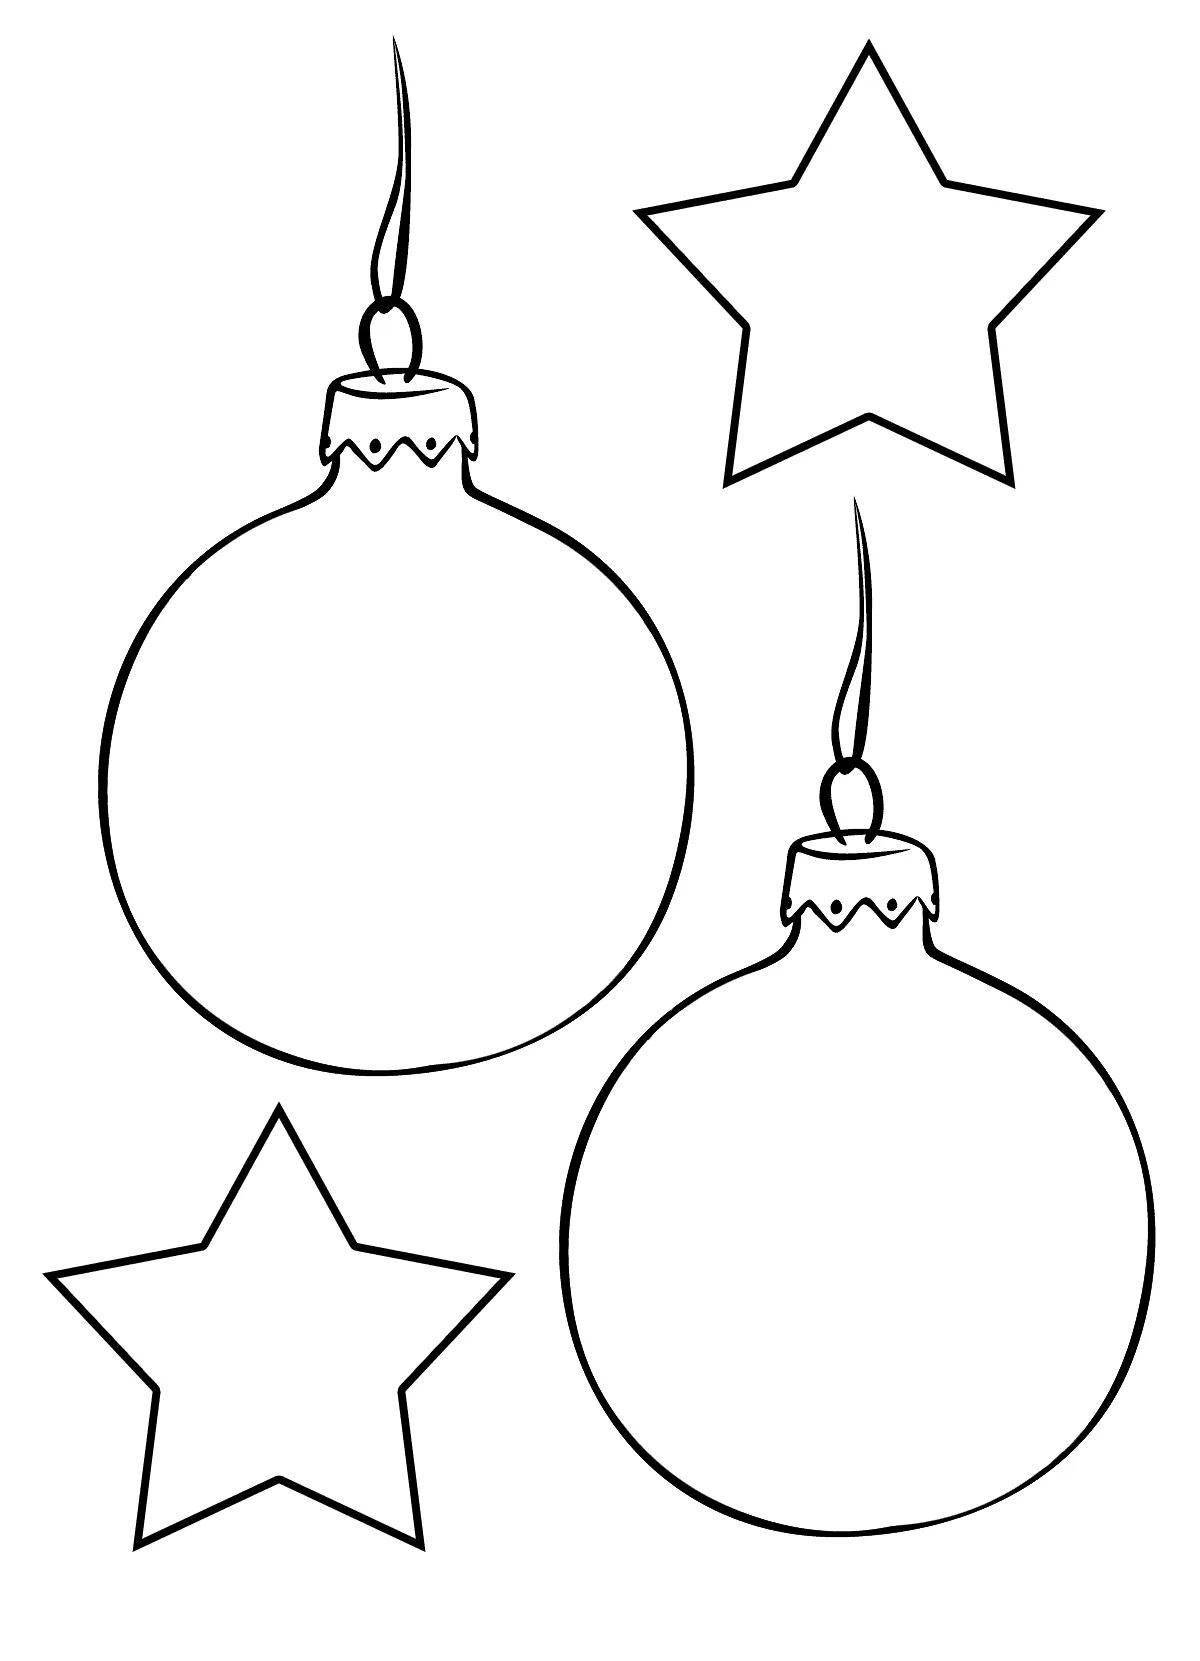 Amazing Christmas ball coloring book for kids